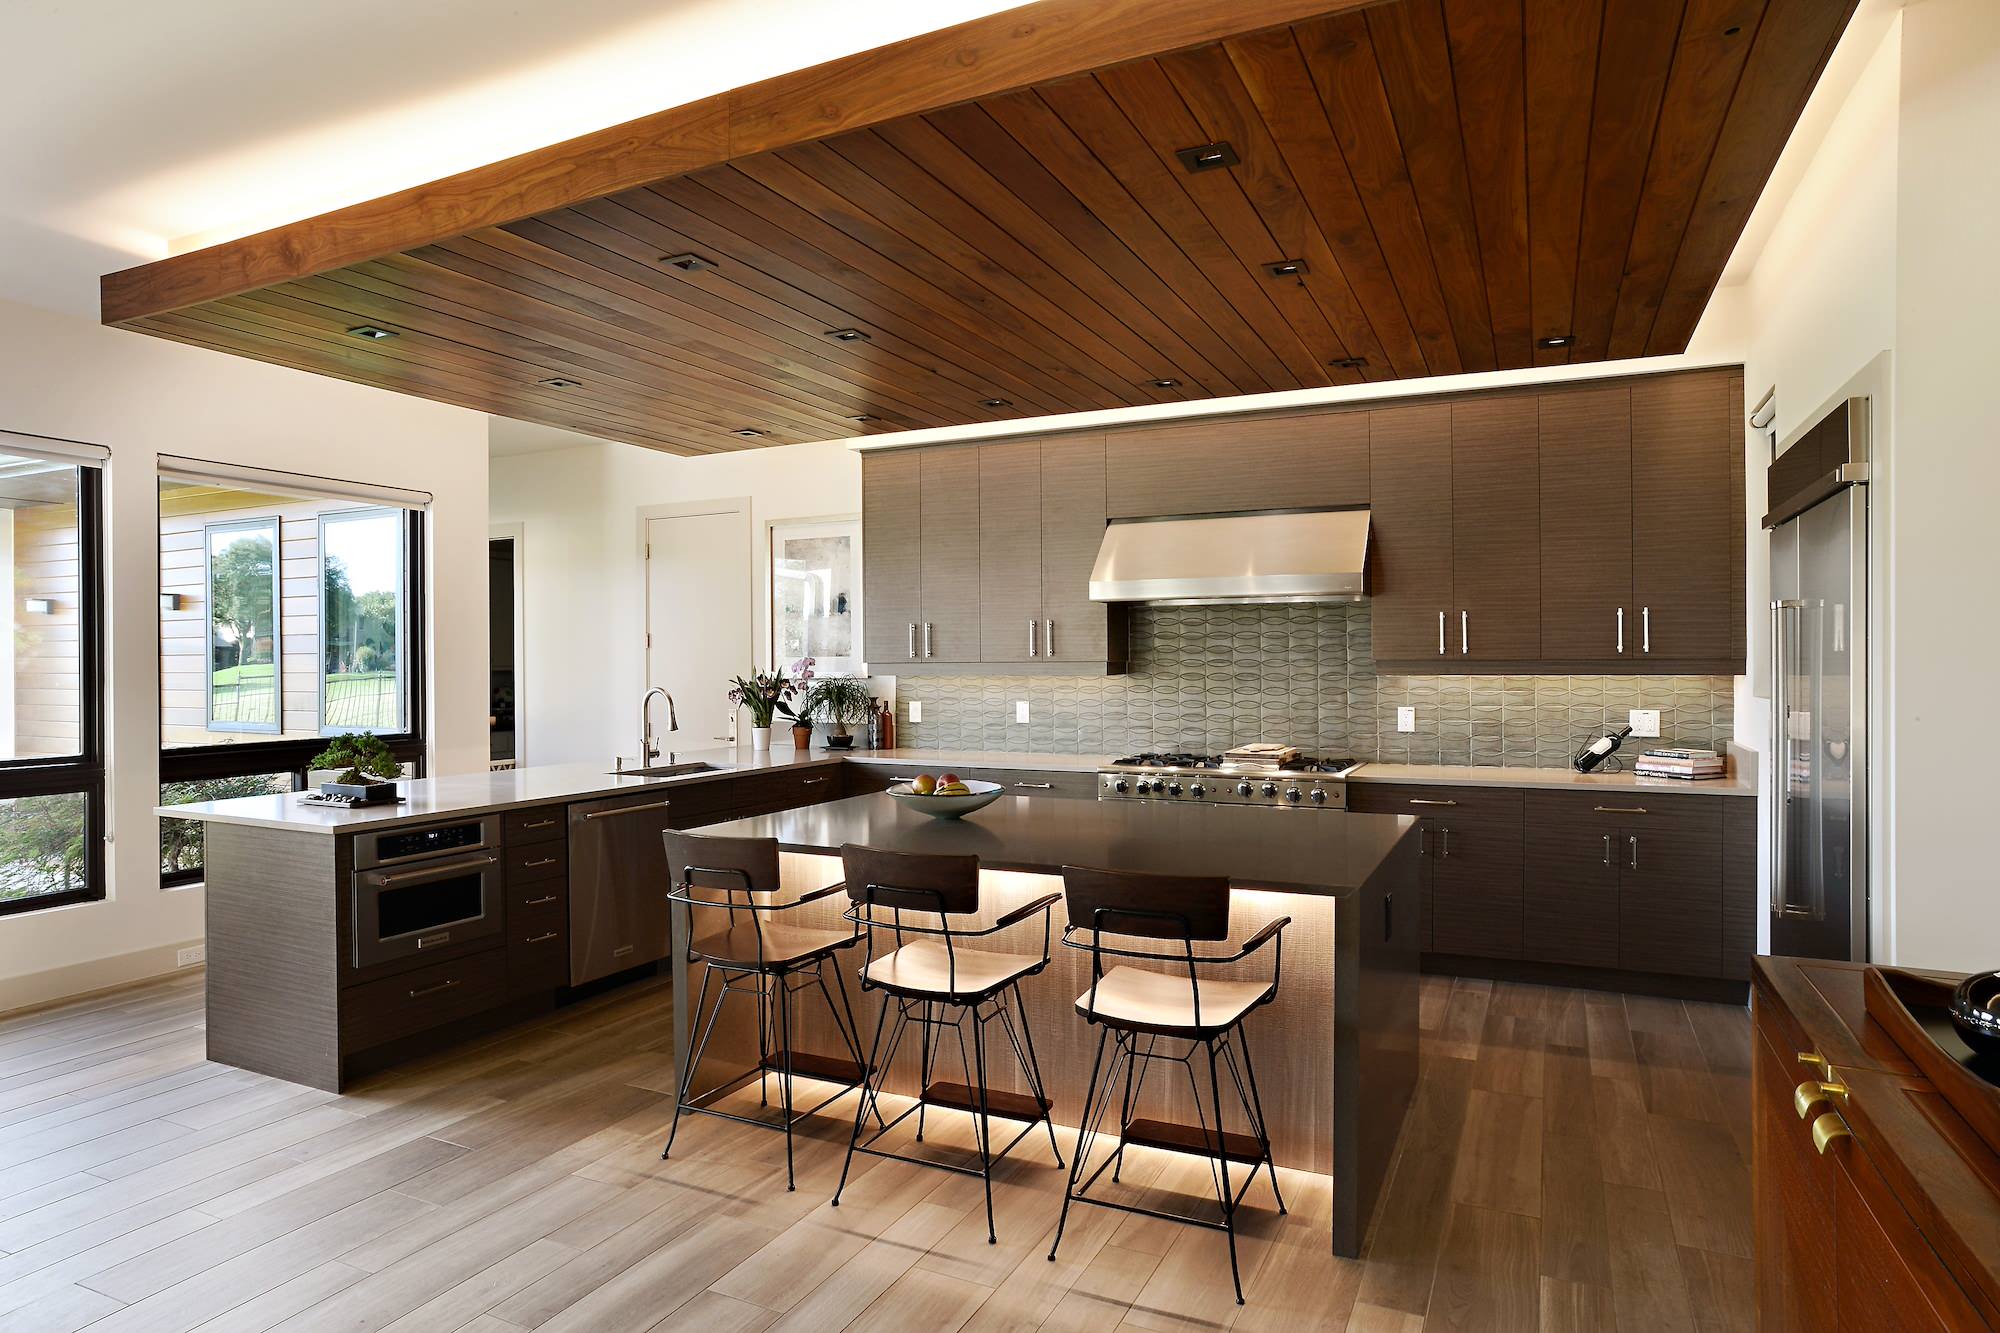 Modern Kitchen with Light Brown Cabinets  Brown kitchen cabinets, Brown  cabinets, Modern kitchen